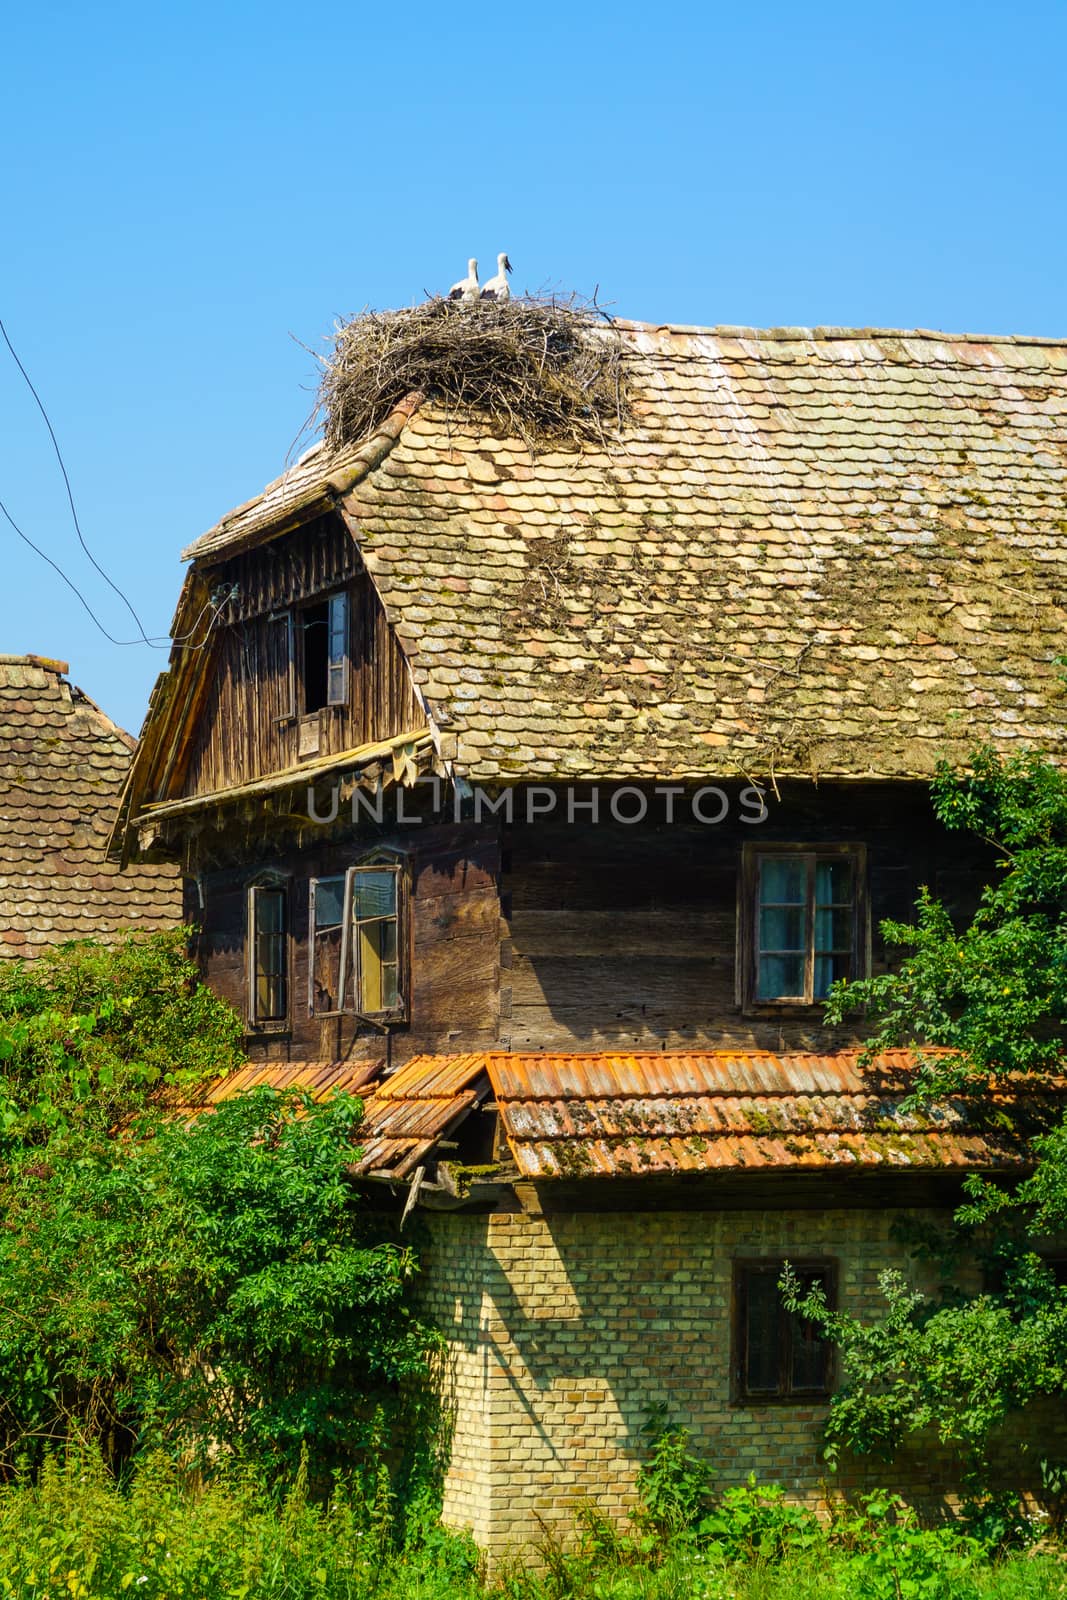 Typical wooden house, with Storks nesting on the roof, in the village Preloscica, Lonjsko Polje area, Croatia